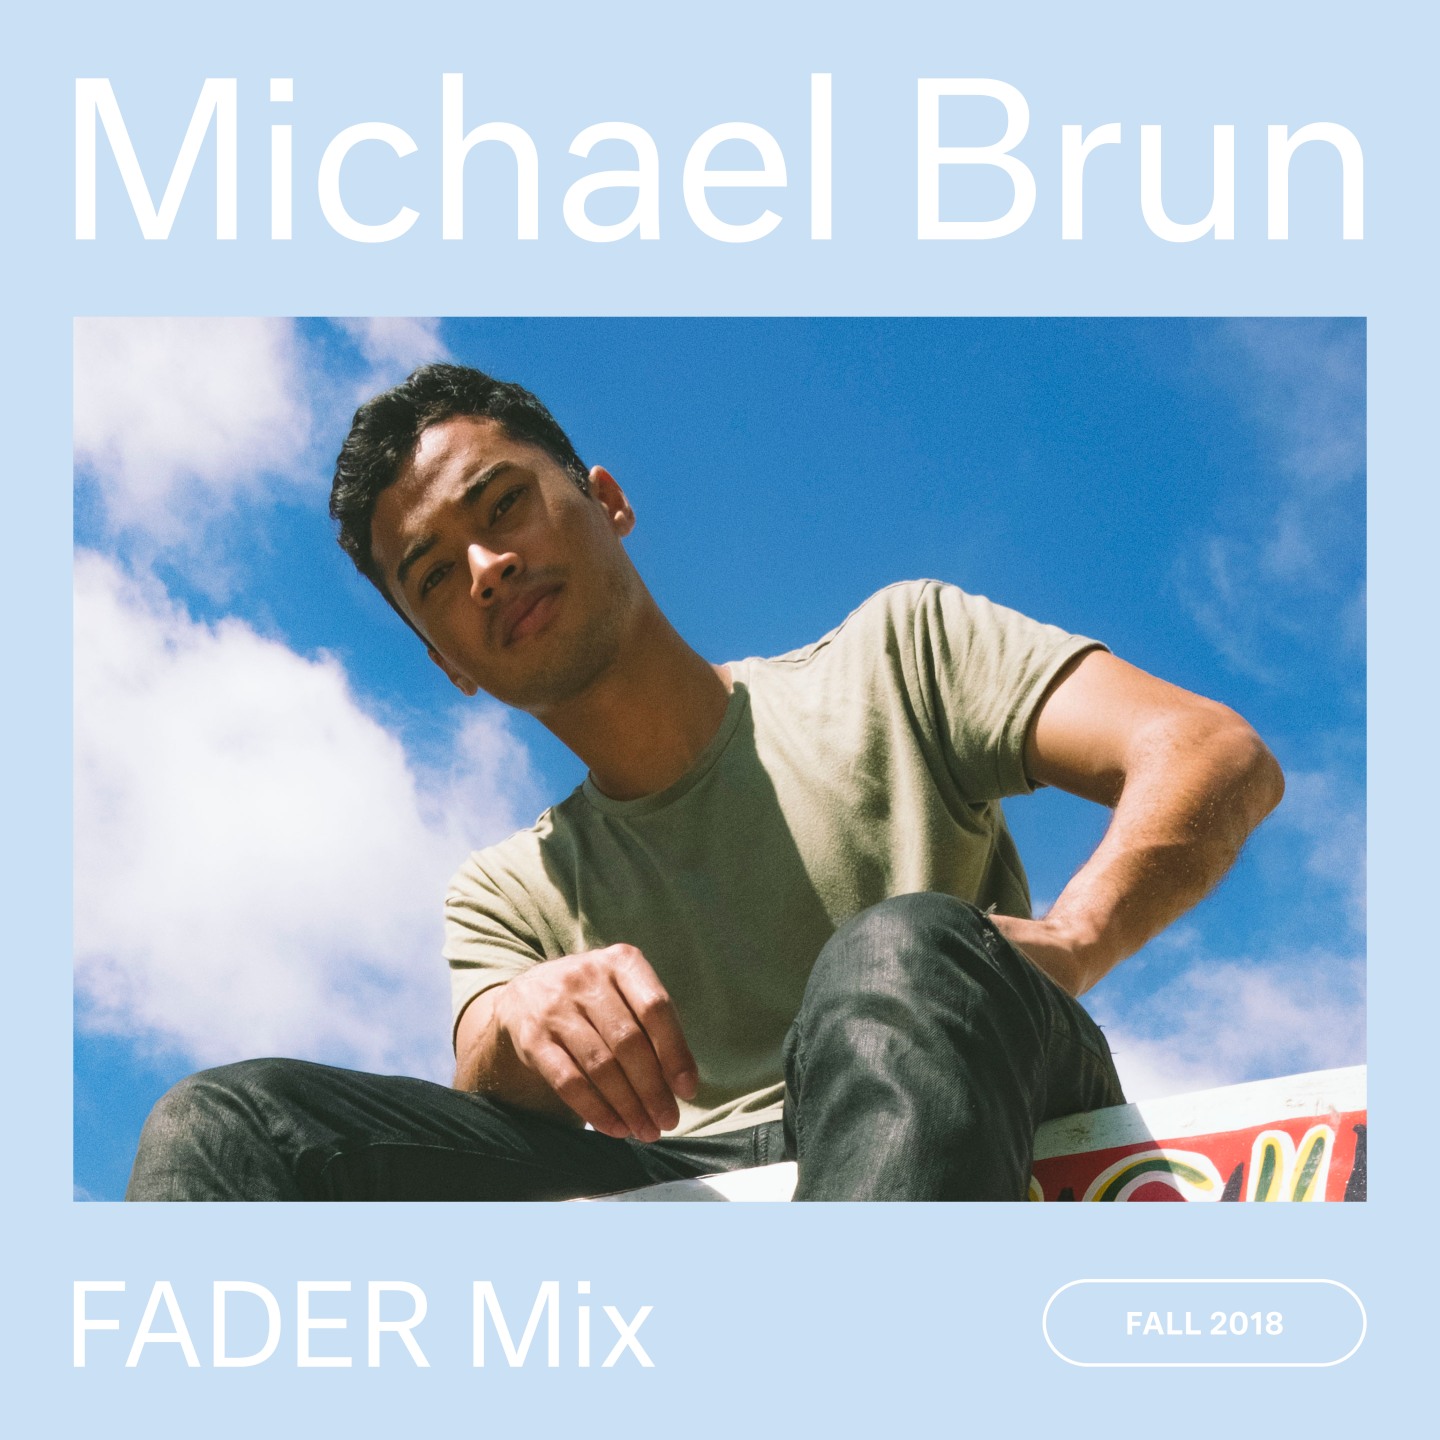 Listen to a new FADER Mix by Michael Brun